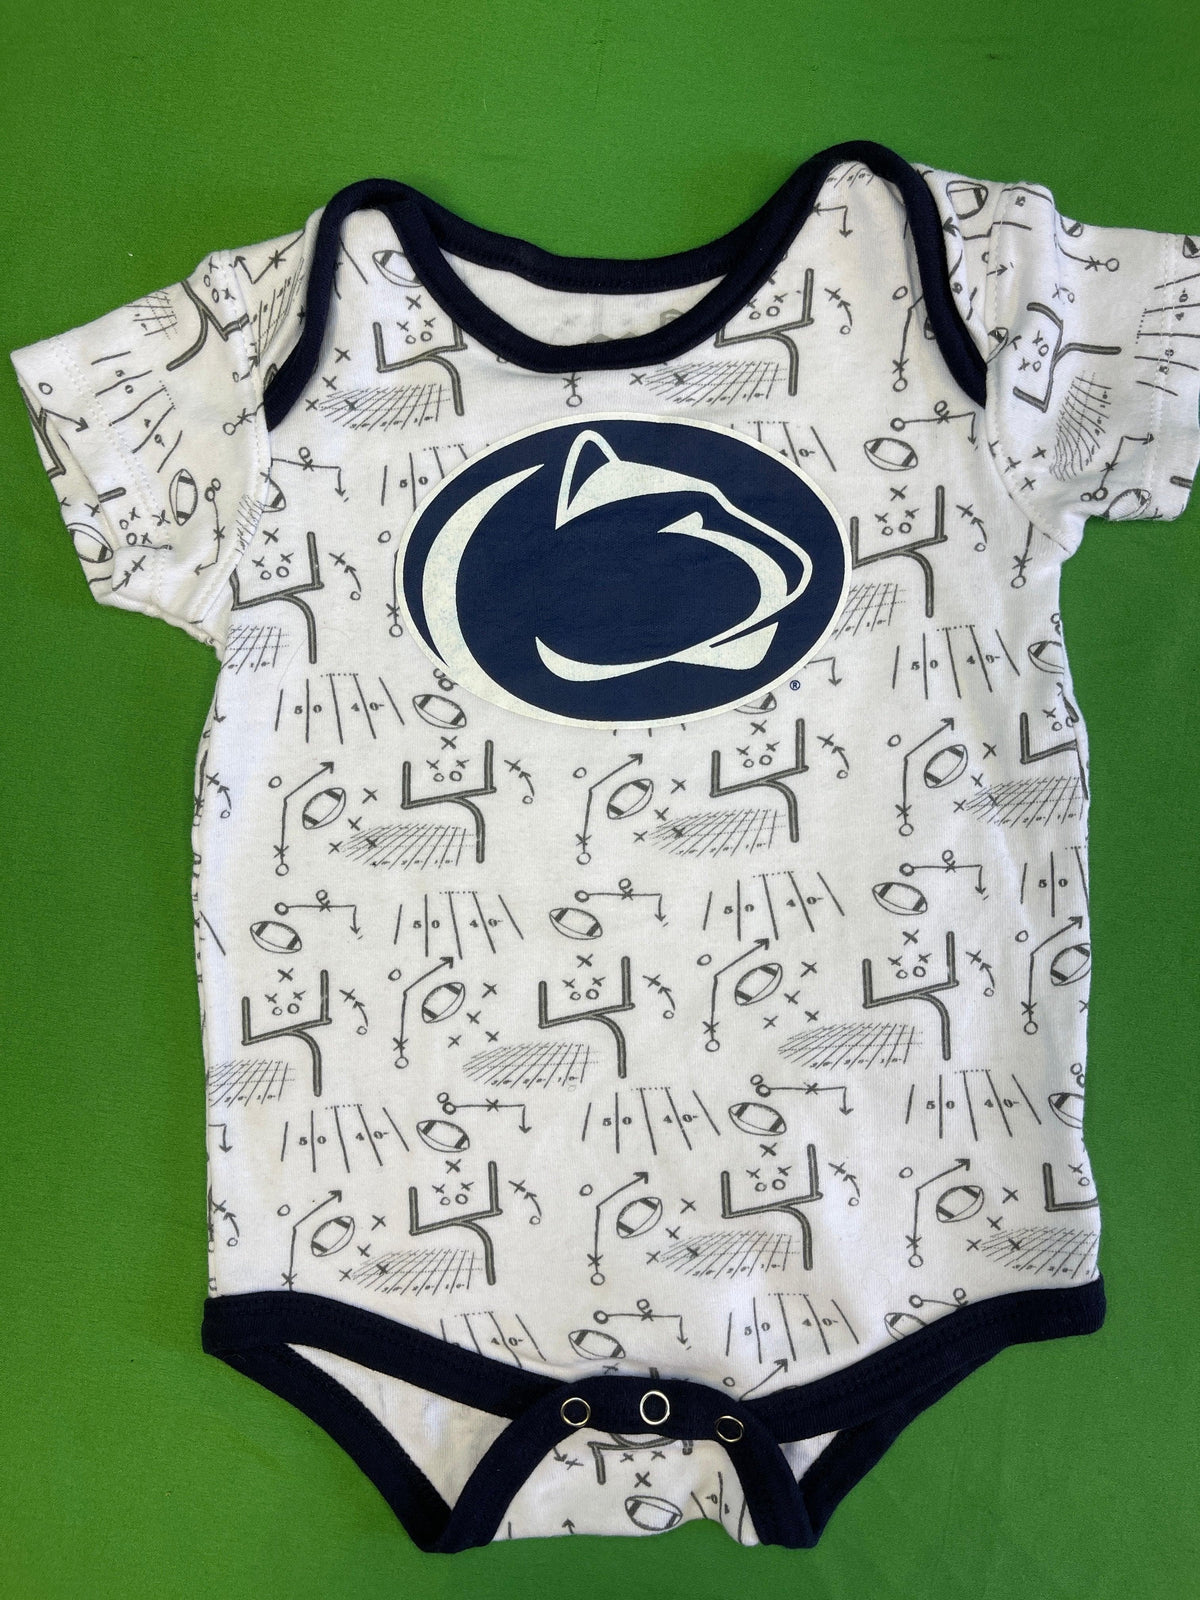 NCAA Penn State Nittany Lions White Patterned Bodysuit 18 months